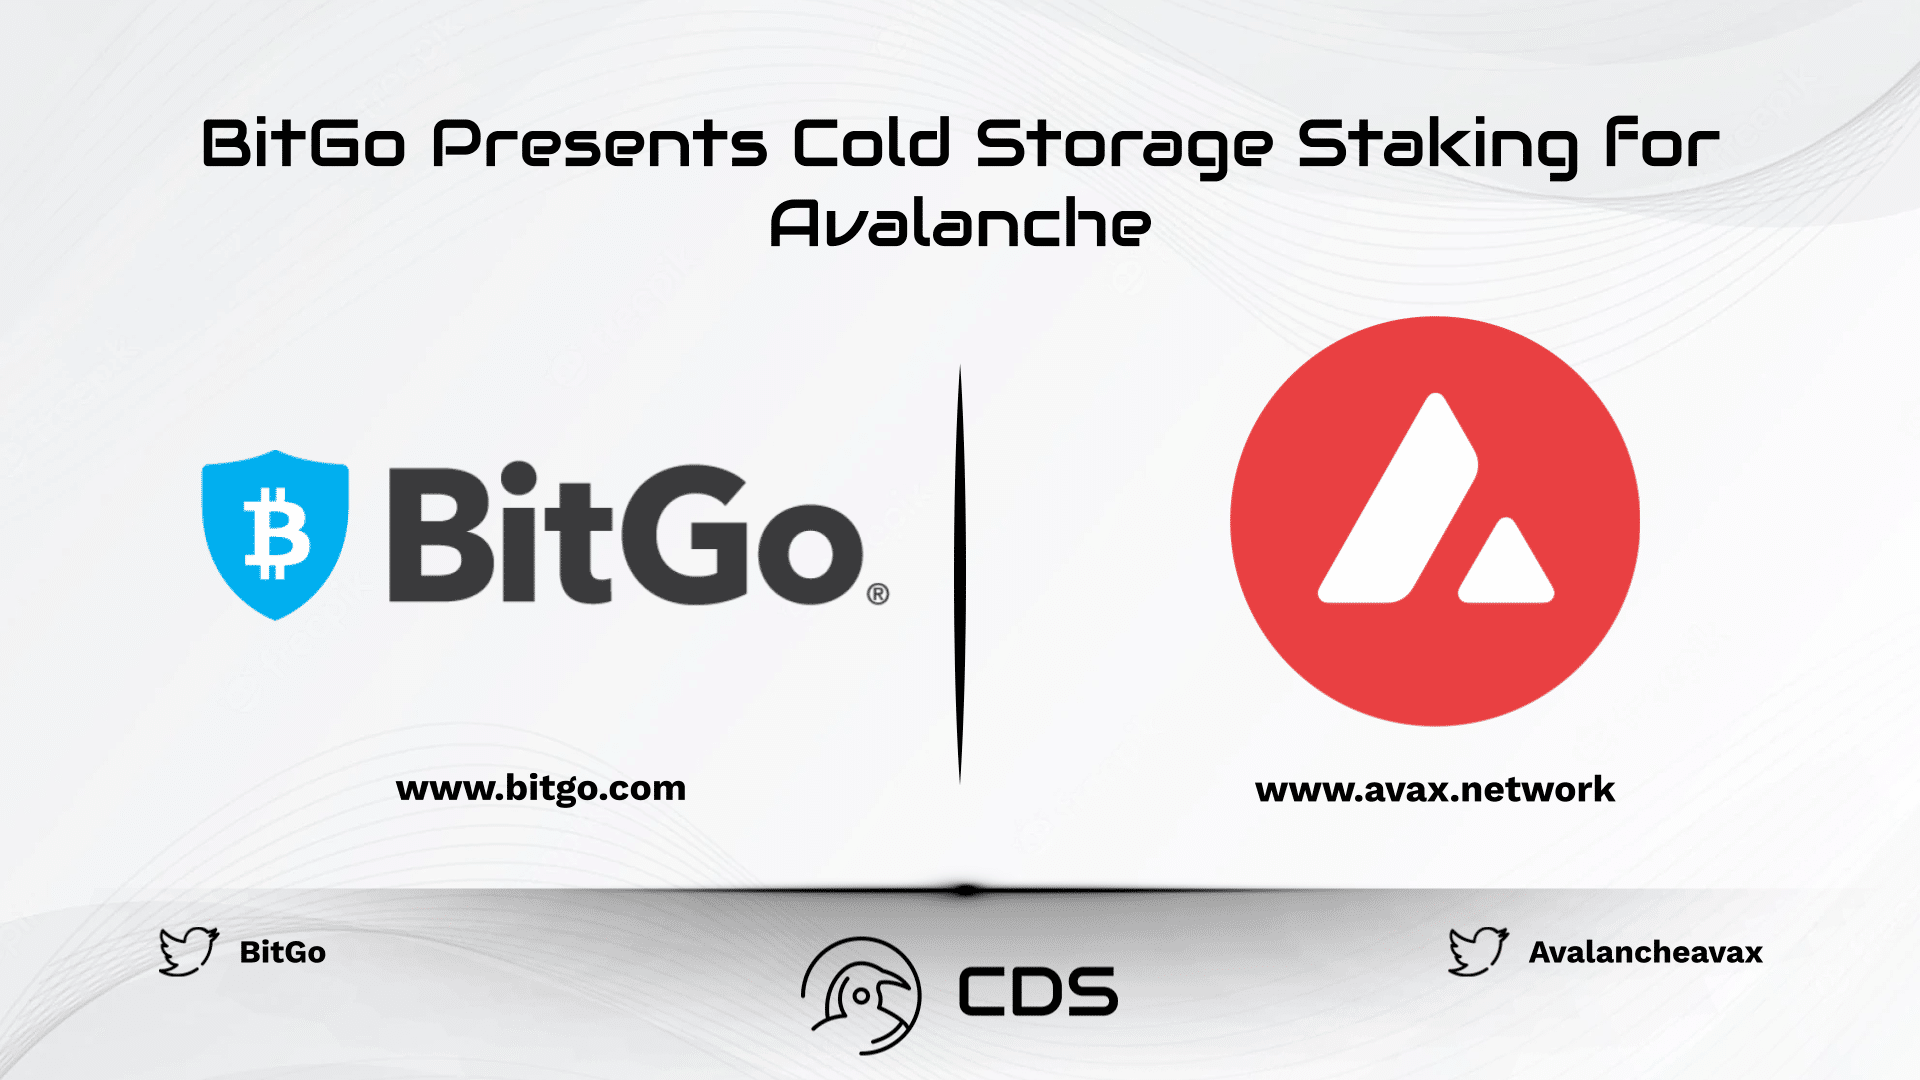 BitGo Presents Cold Storage Staking for Avalanche